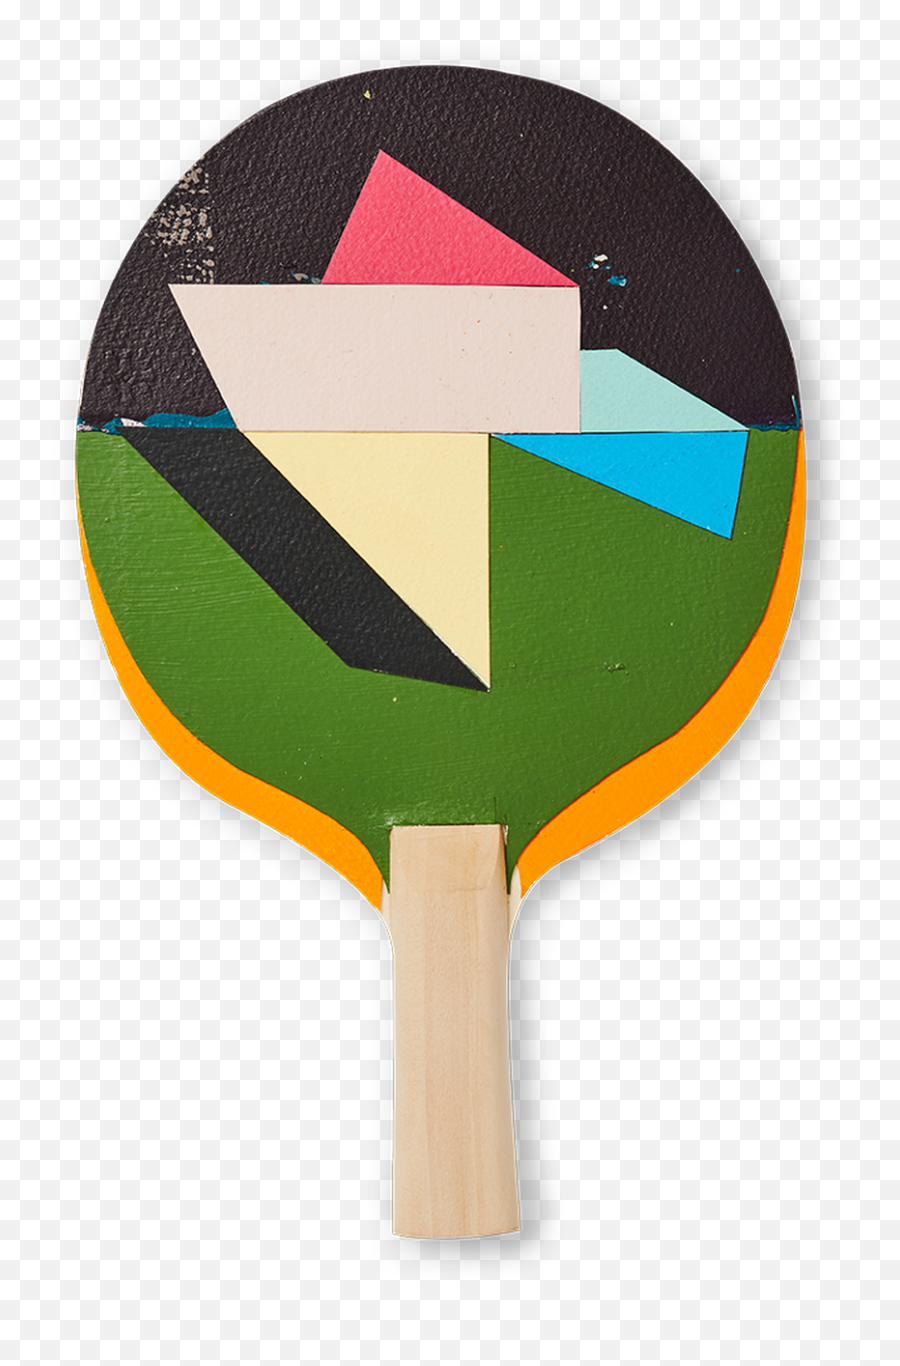 The Art Of Ping Pong Is Back With More One - Ofakind Table Table Tennis Emoji,Ping Pong Emoji